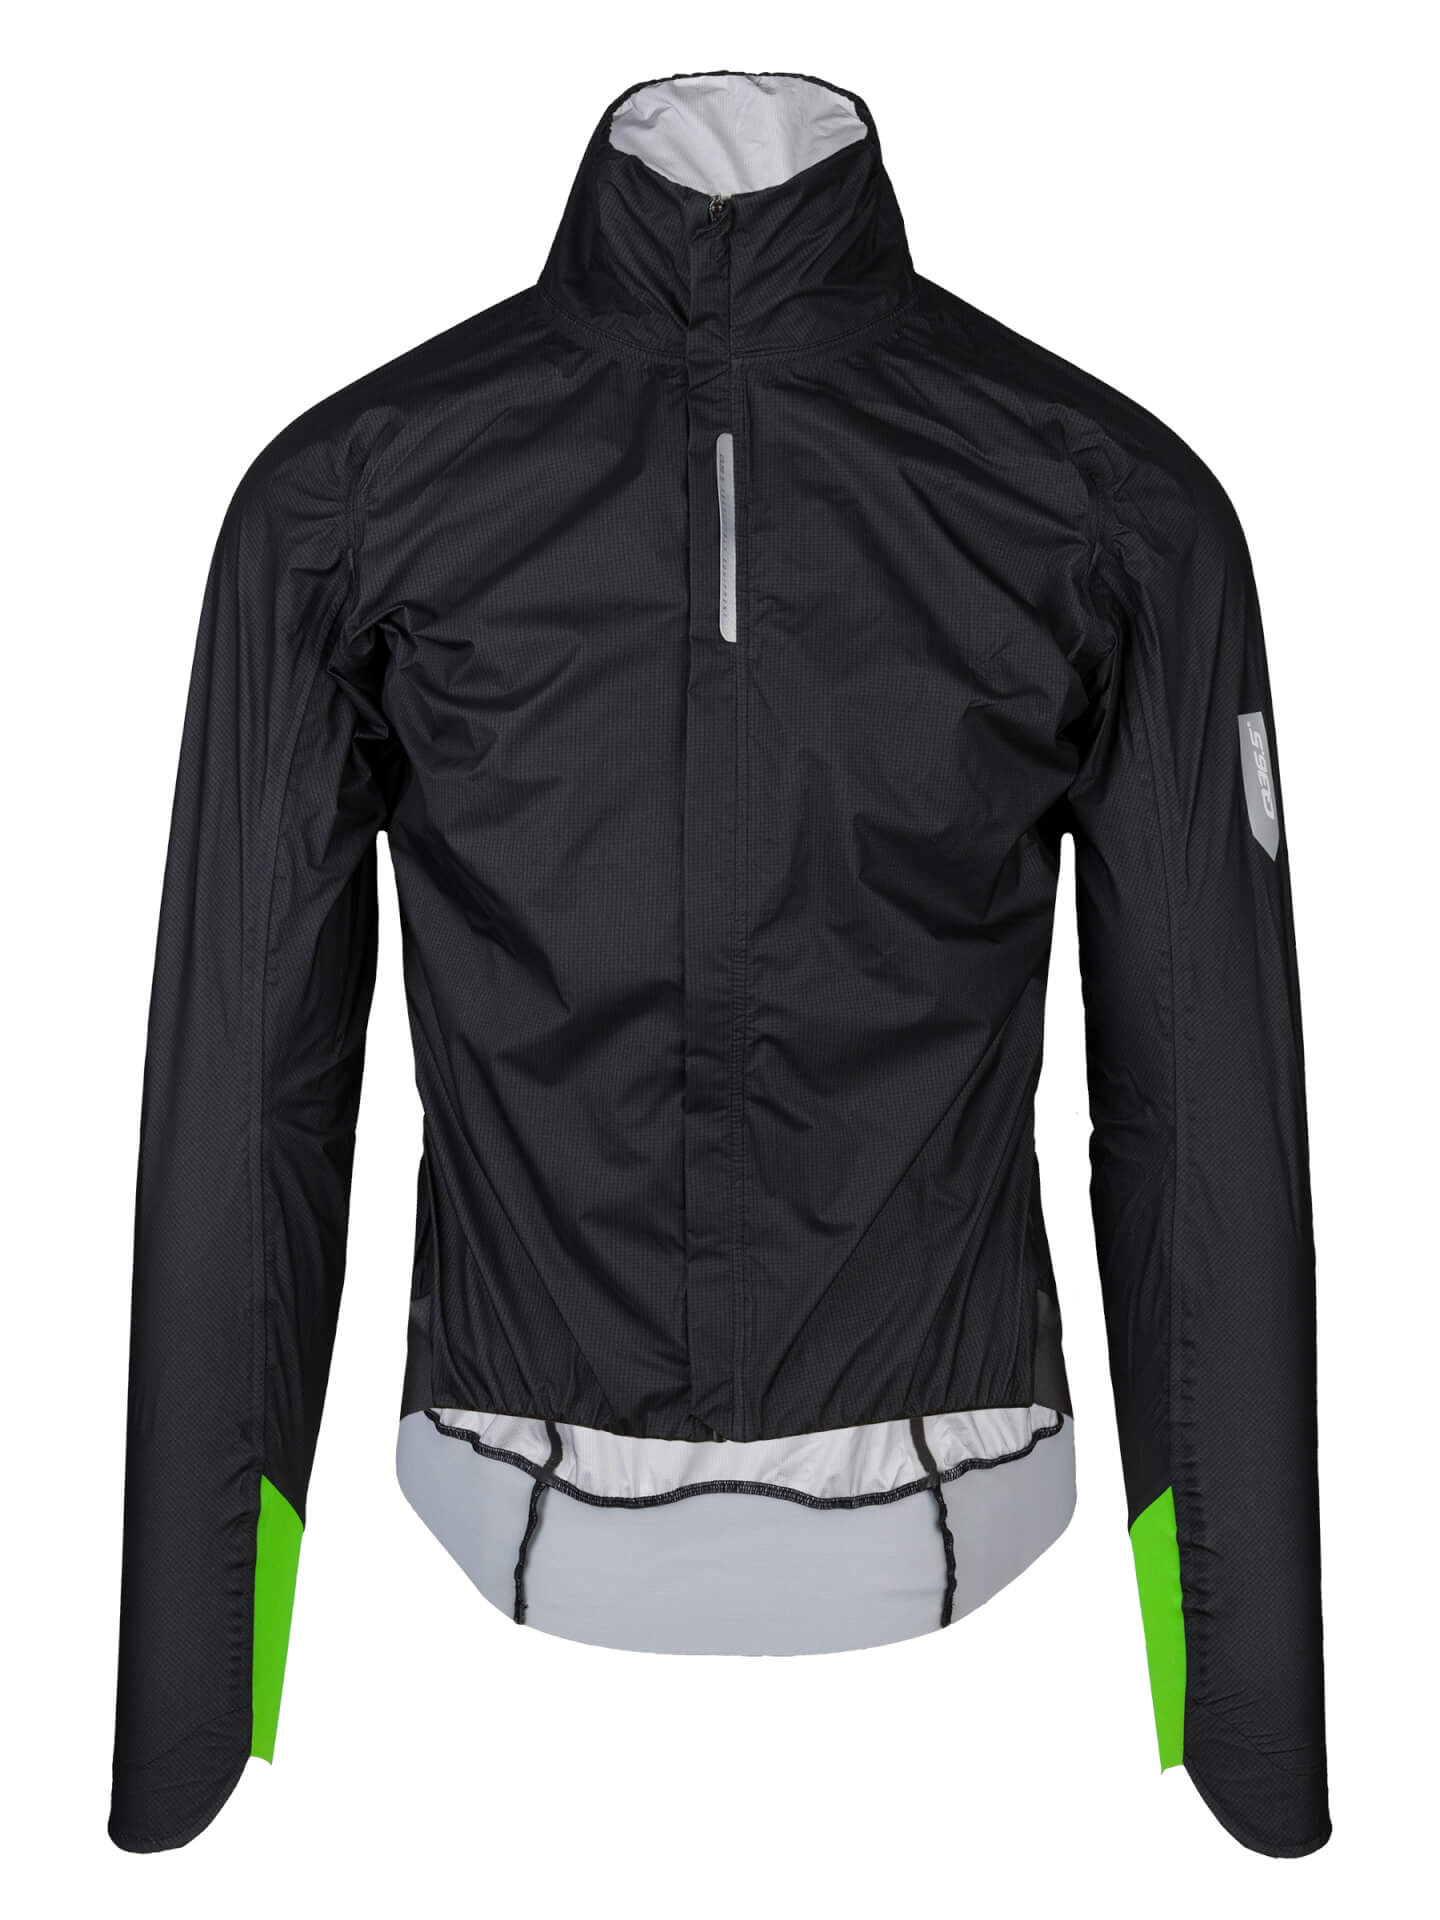 Best waterproof cycling jackets: 6 of the best for 2023 